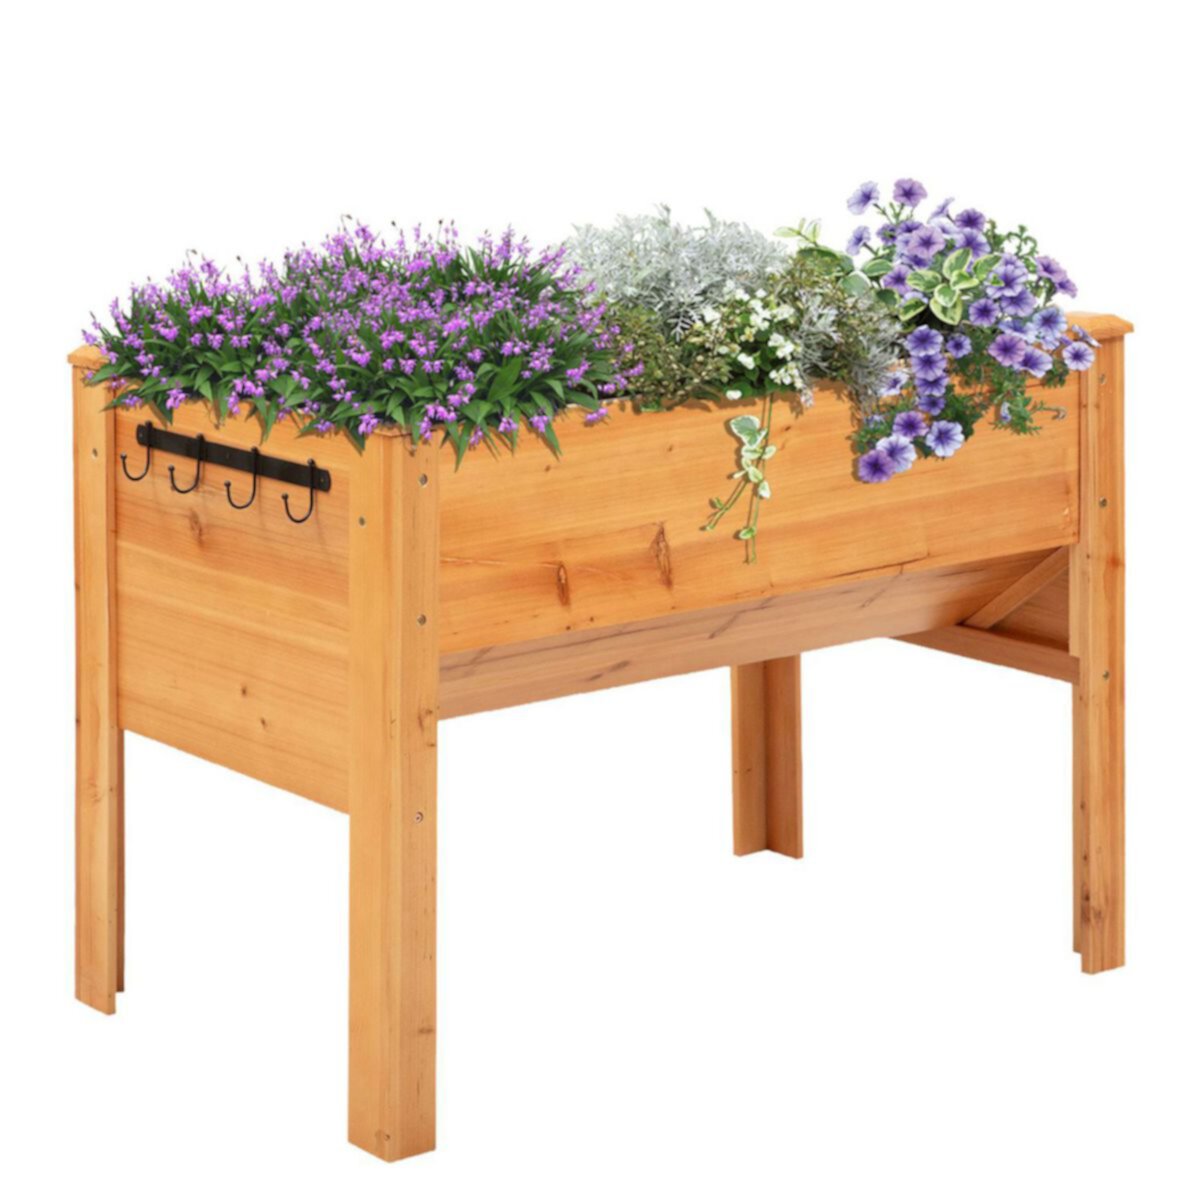 Outsunny 48'' Fir Wood Raised Garden Bed with Tool Hooks Elevated Planter Box Stand with Unique Funnel Design for Backyard Patio to Grow Vegetables Herbs and Flowers Outsunny